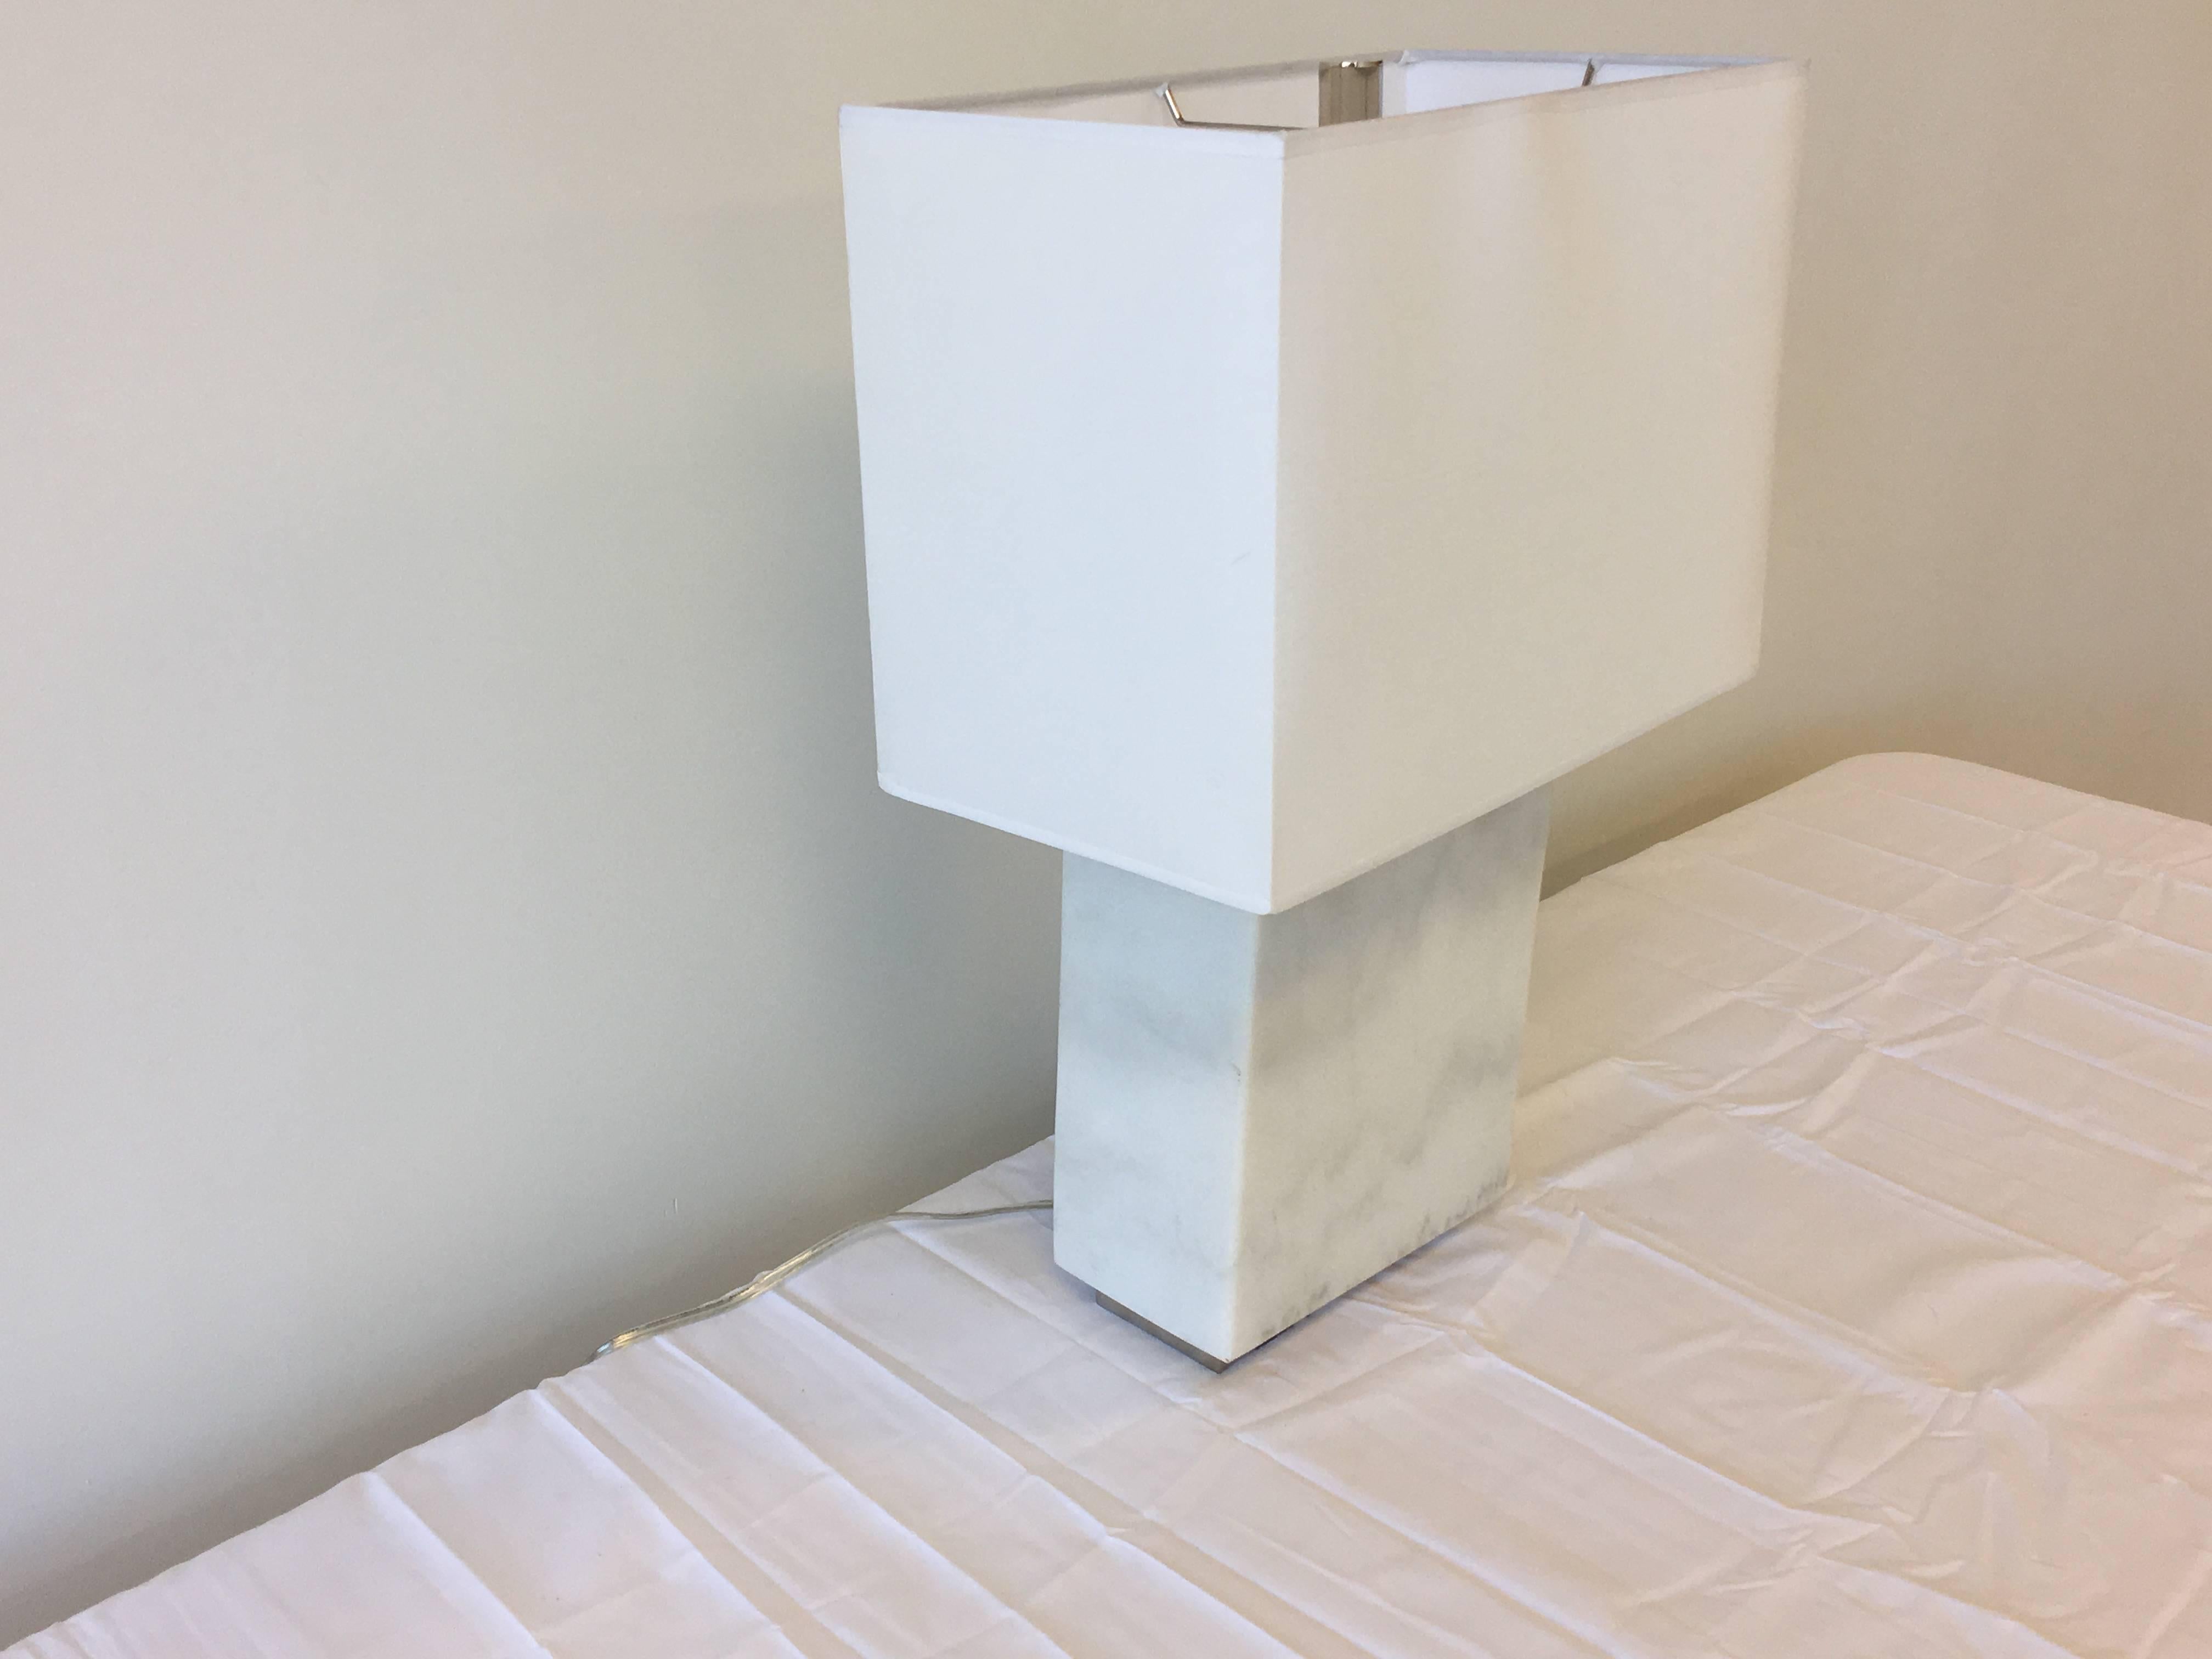 Offered is a fabulous, modern white marble and chrome Ralph Lauren lamp. The base is solid white marble with a chrome plinth raised base. Includes white, rectangular lampshade and chrome finial. Incredibly heavy.

Marked: 